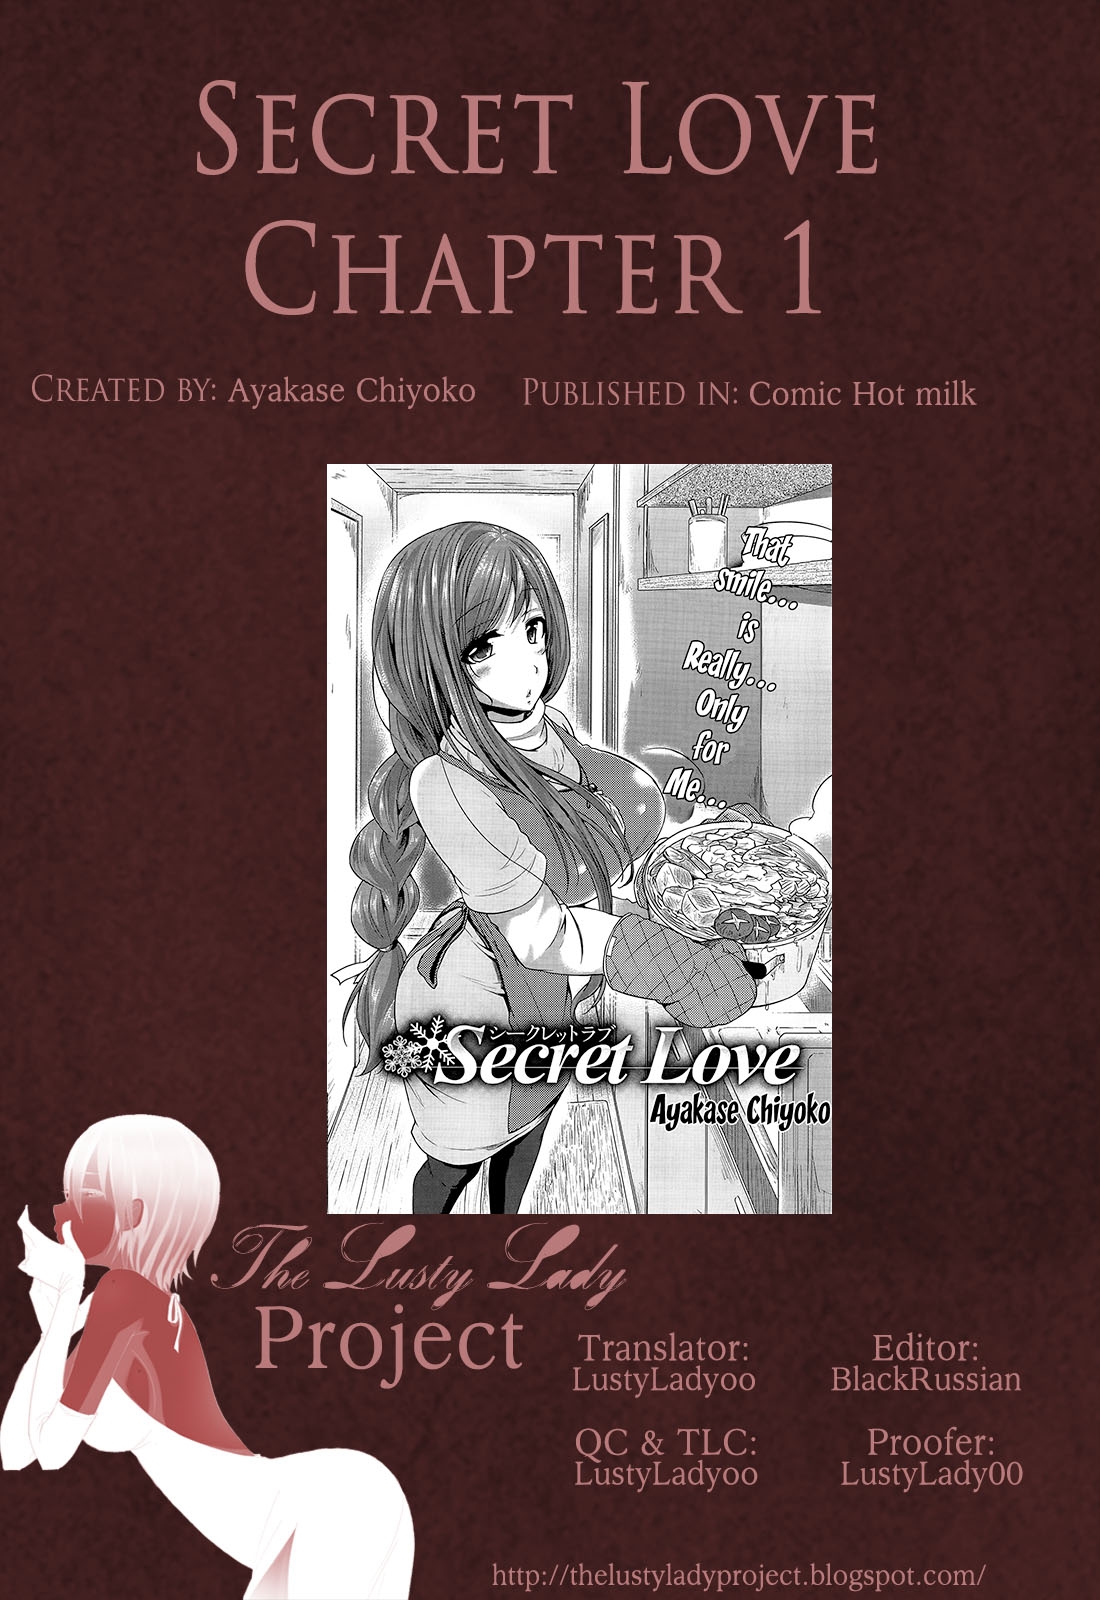 [Ayakase Chiyoko] Secret Love Ch.1 + Extra Ch.2+ 3 (Comic Hot Milk)[ENG][The Lusty Lady Project] 18